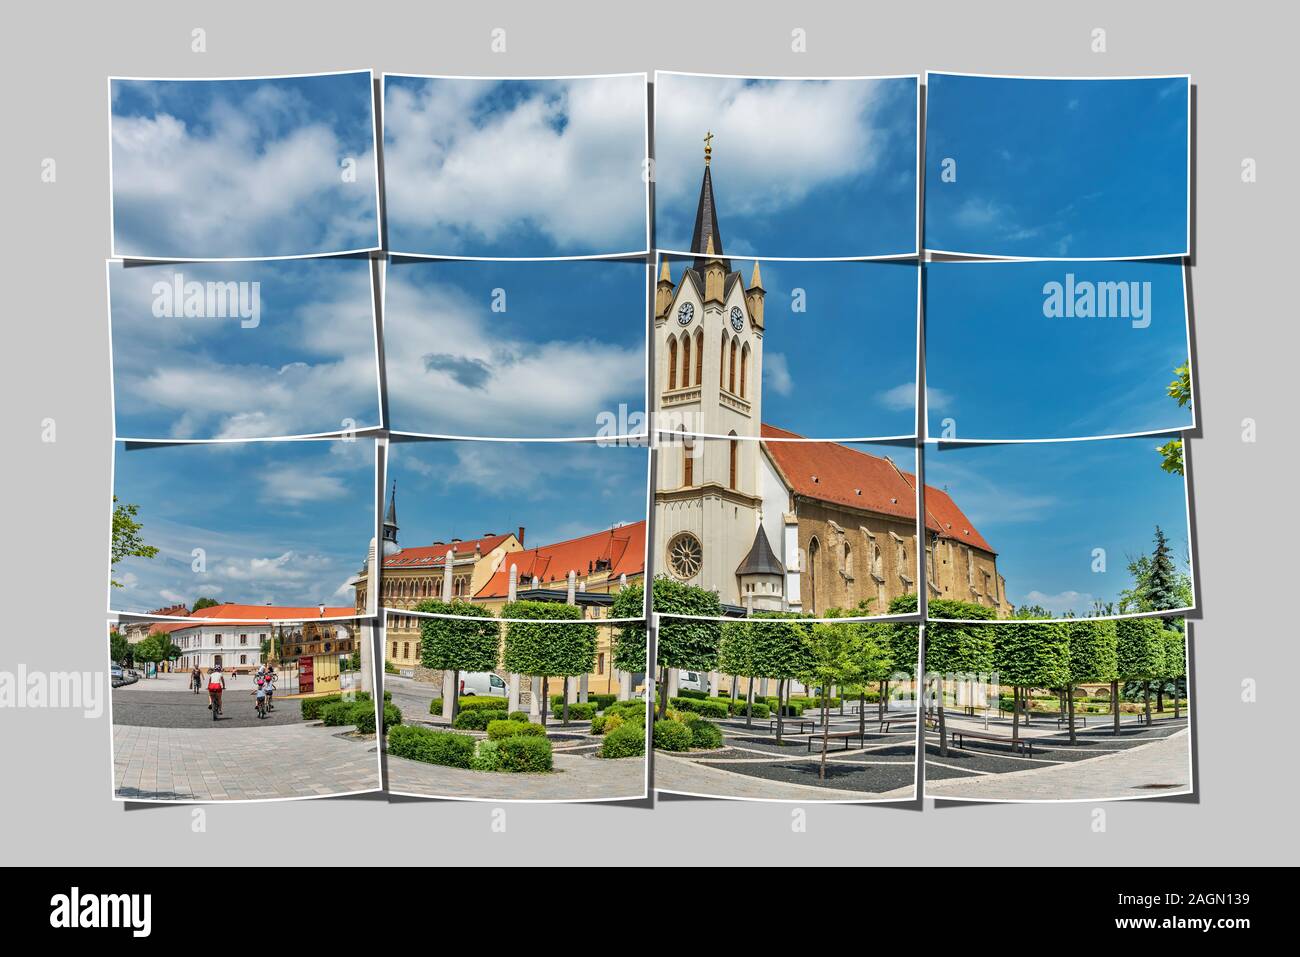 The Church of Our Lady of Hungary is located on the main square Fo Ter in Keszthely, Zala county, Western Transdanubia, Hungary, Europe Stock Photo